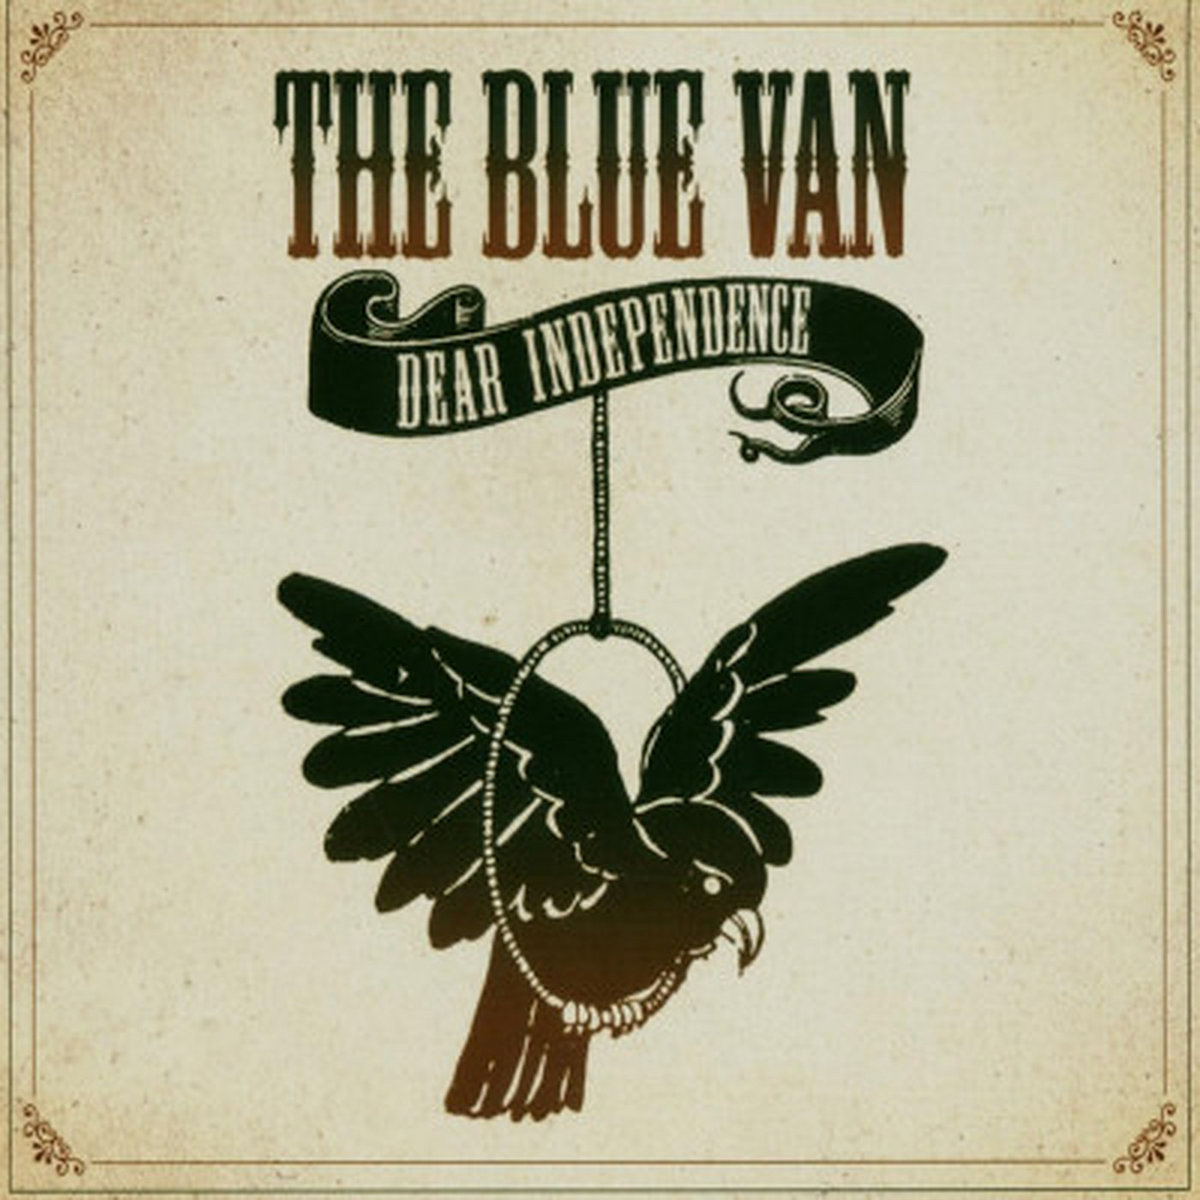 Dear independence | The Blue Van